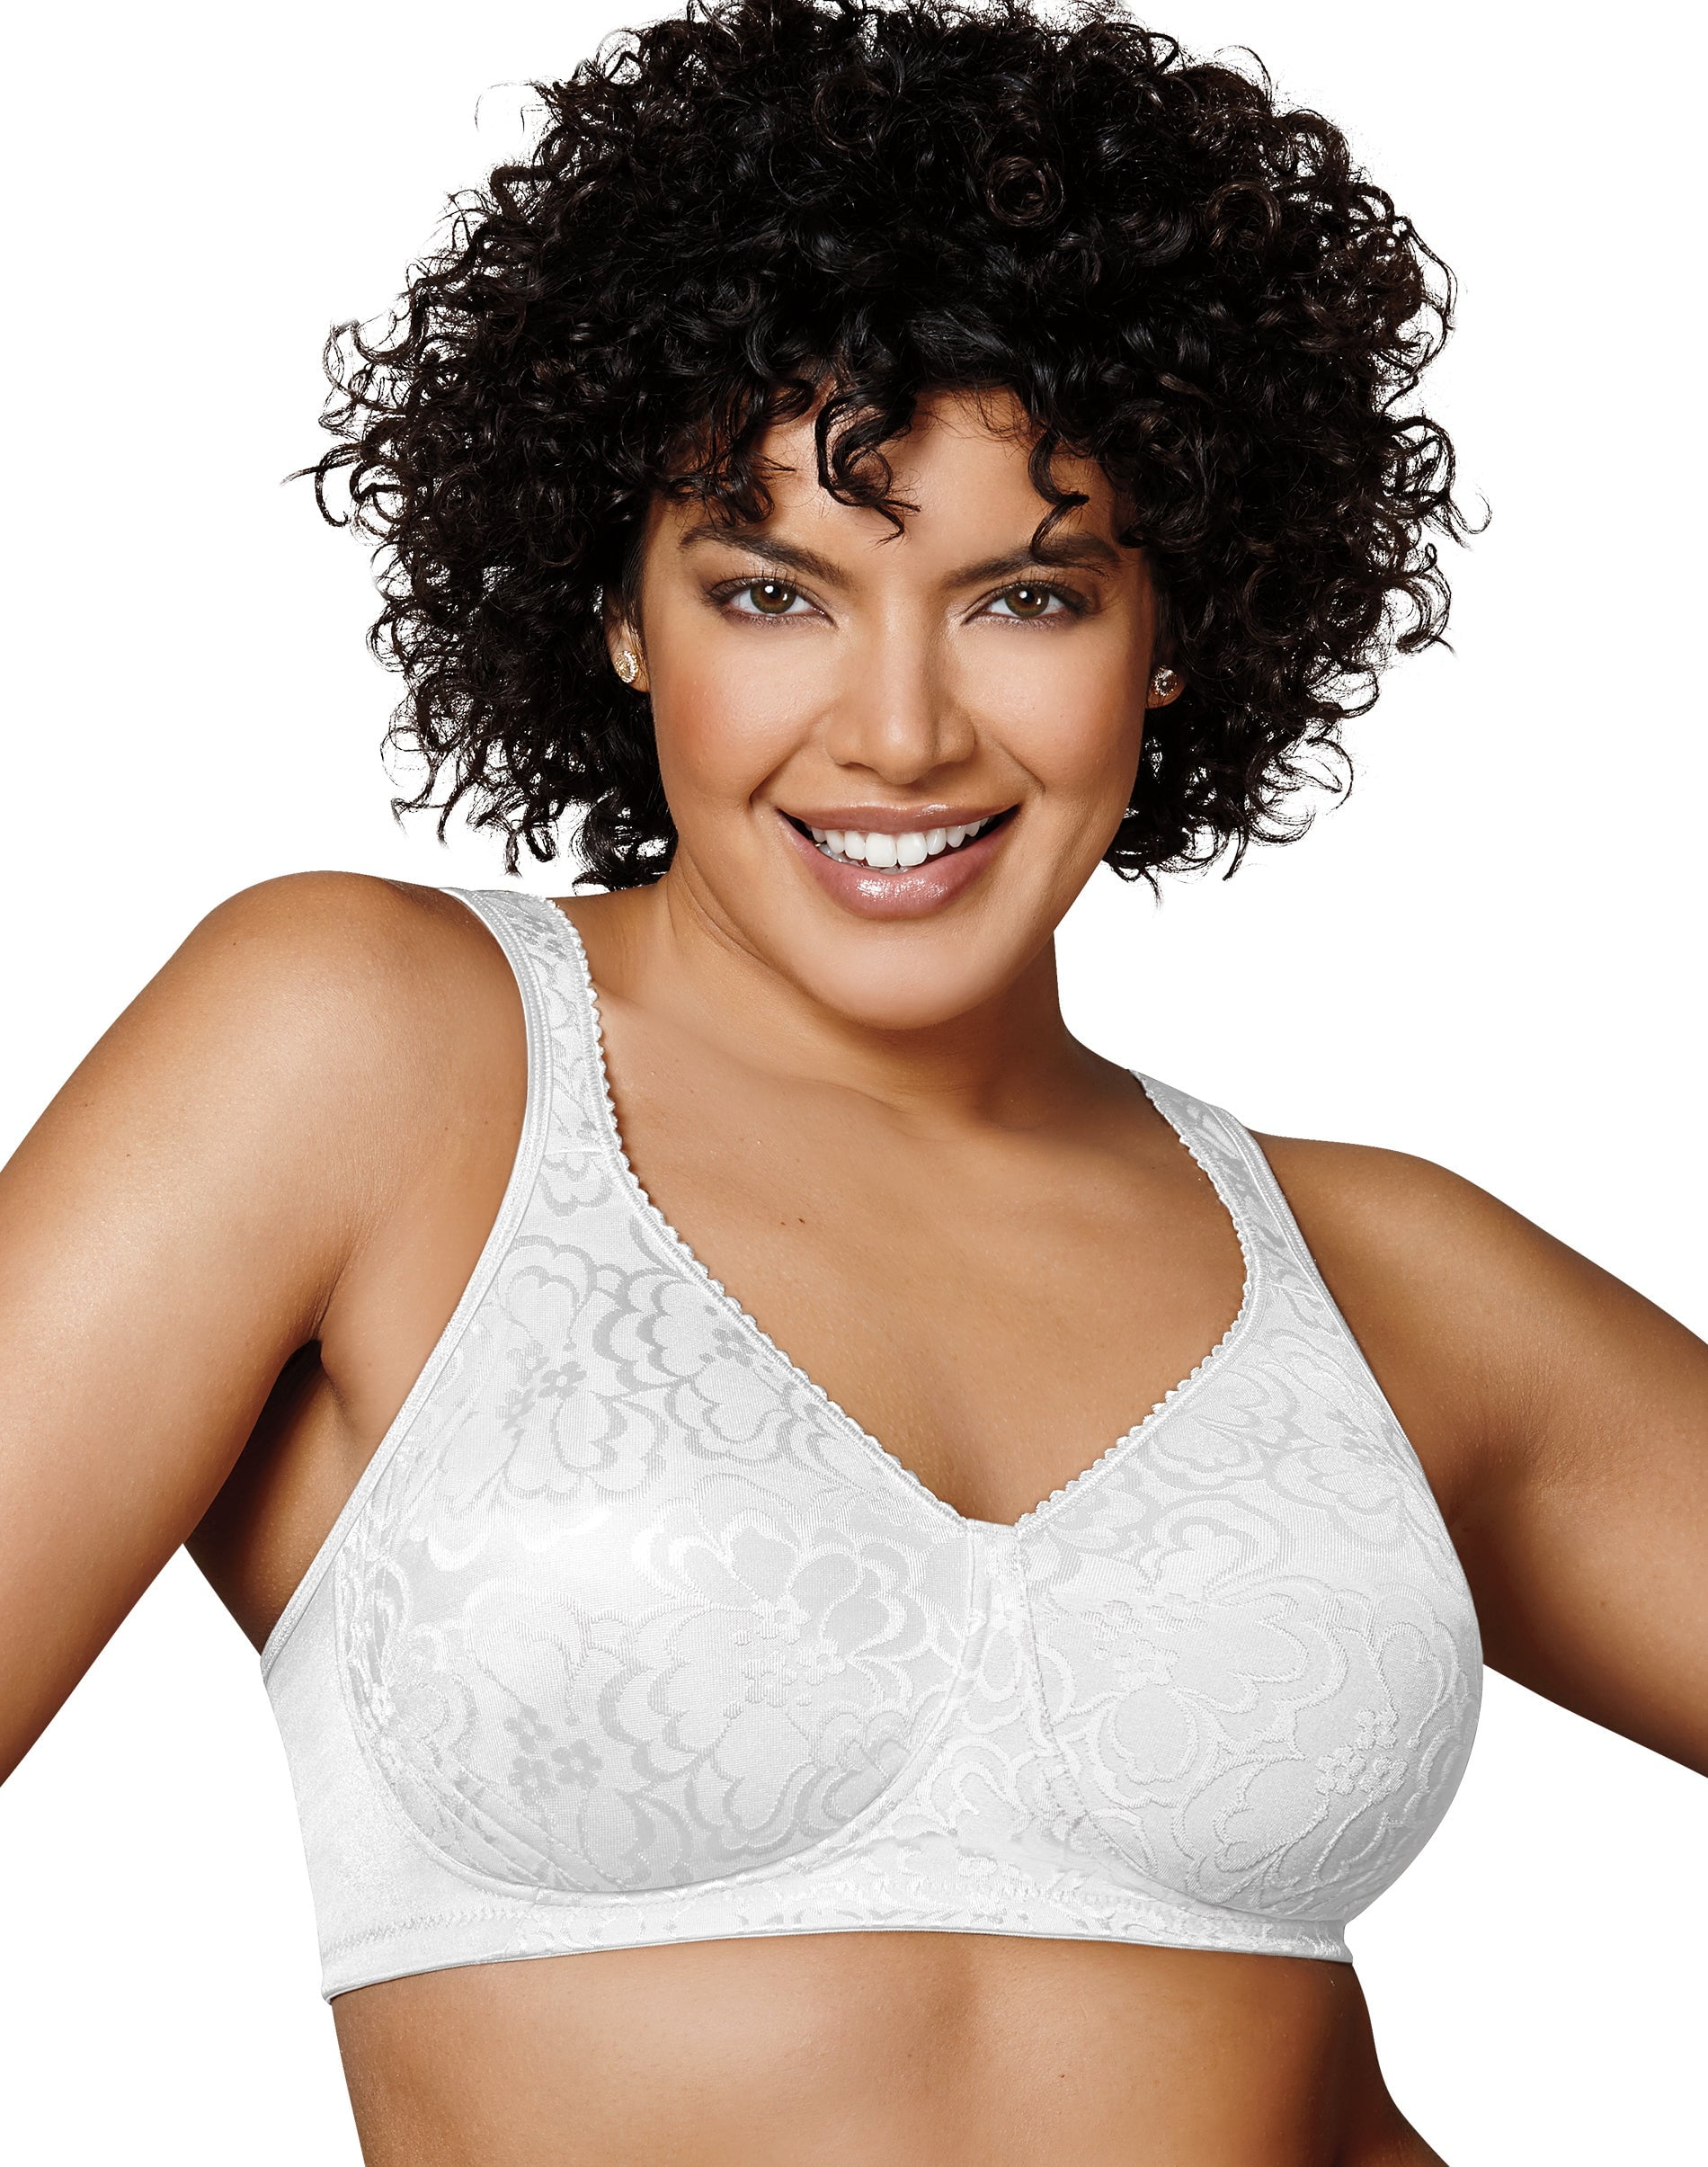 Playtex Women's 18 Hour Ultimate Lift And Support Wire-free Bra